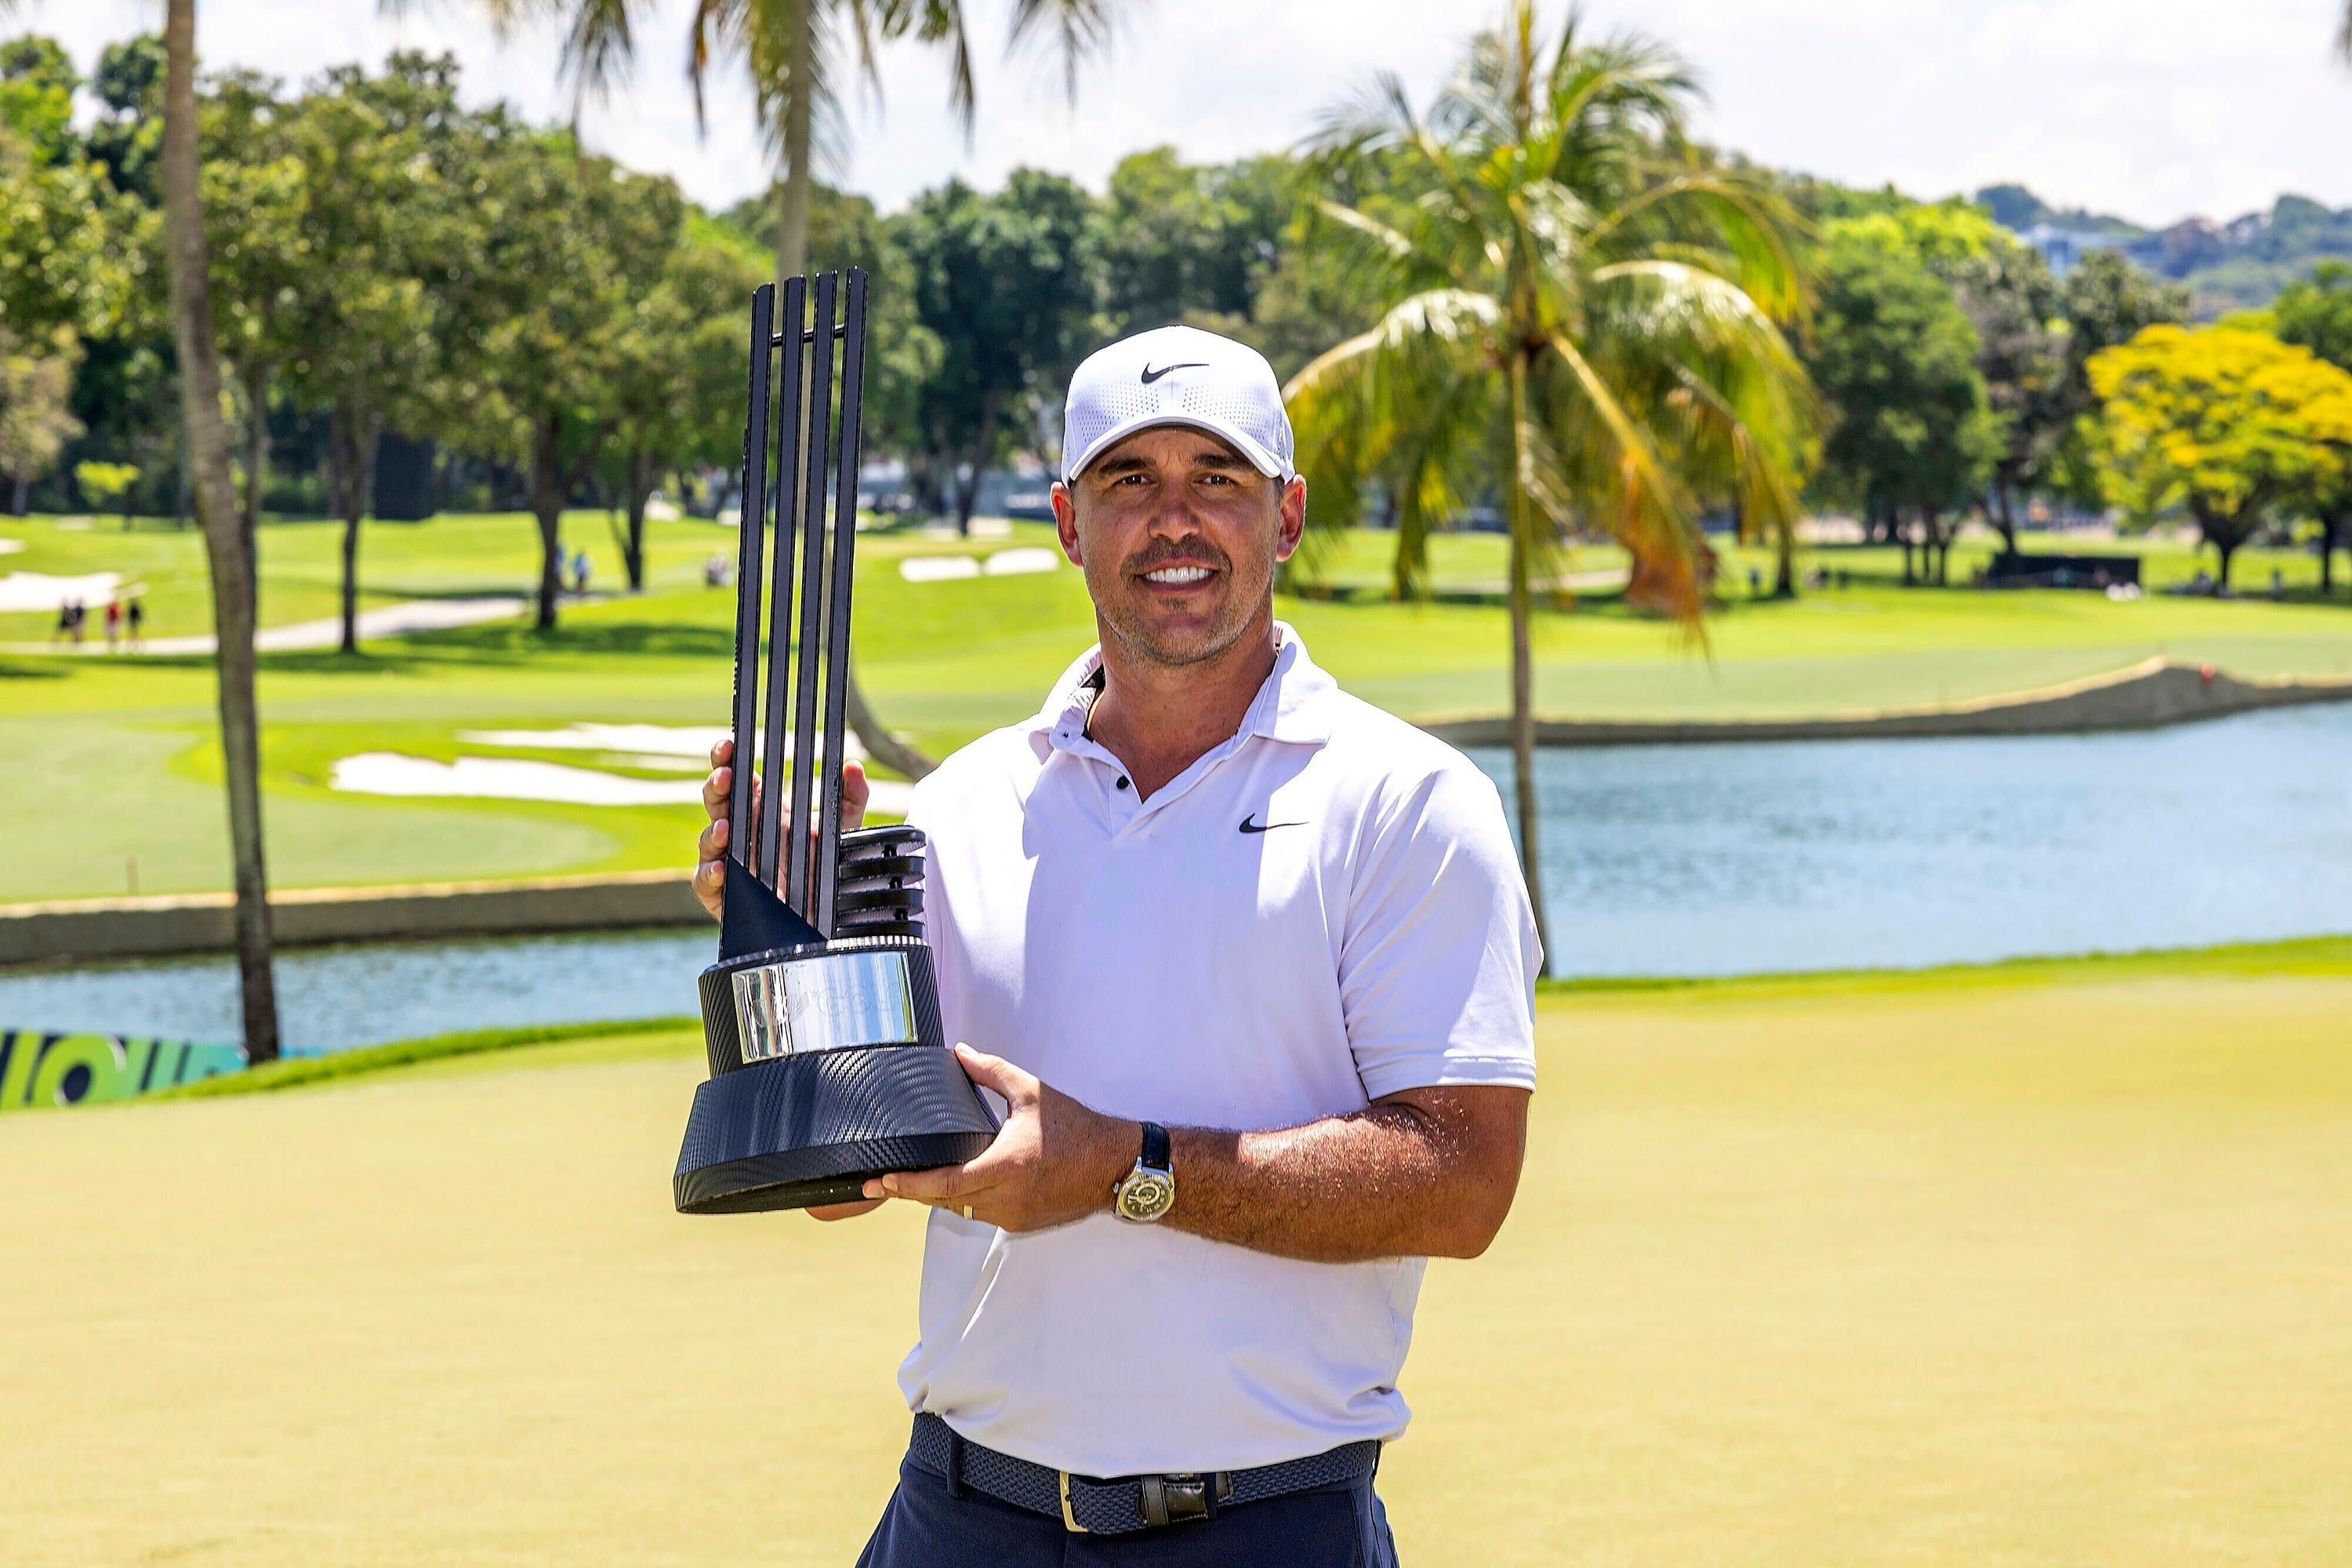 Koepka warmed up for his US PGA Championship title defence by winning the LIV Golf event in Singapore